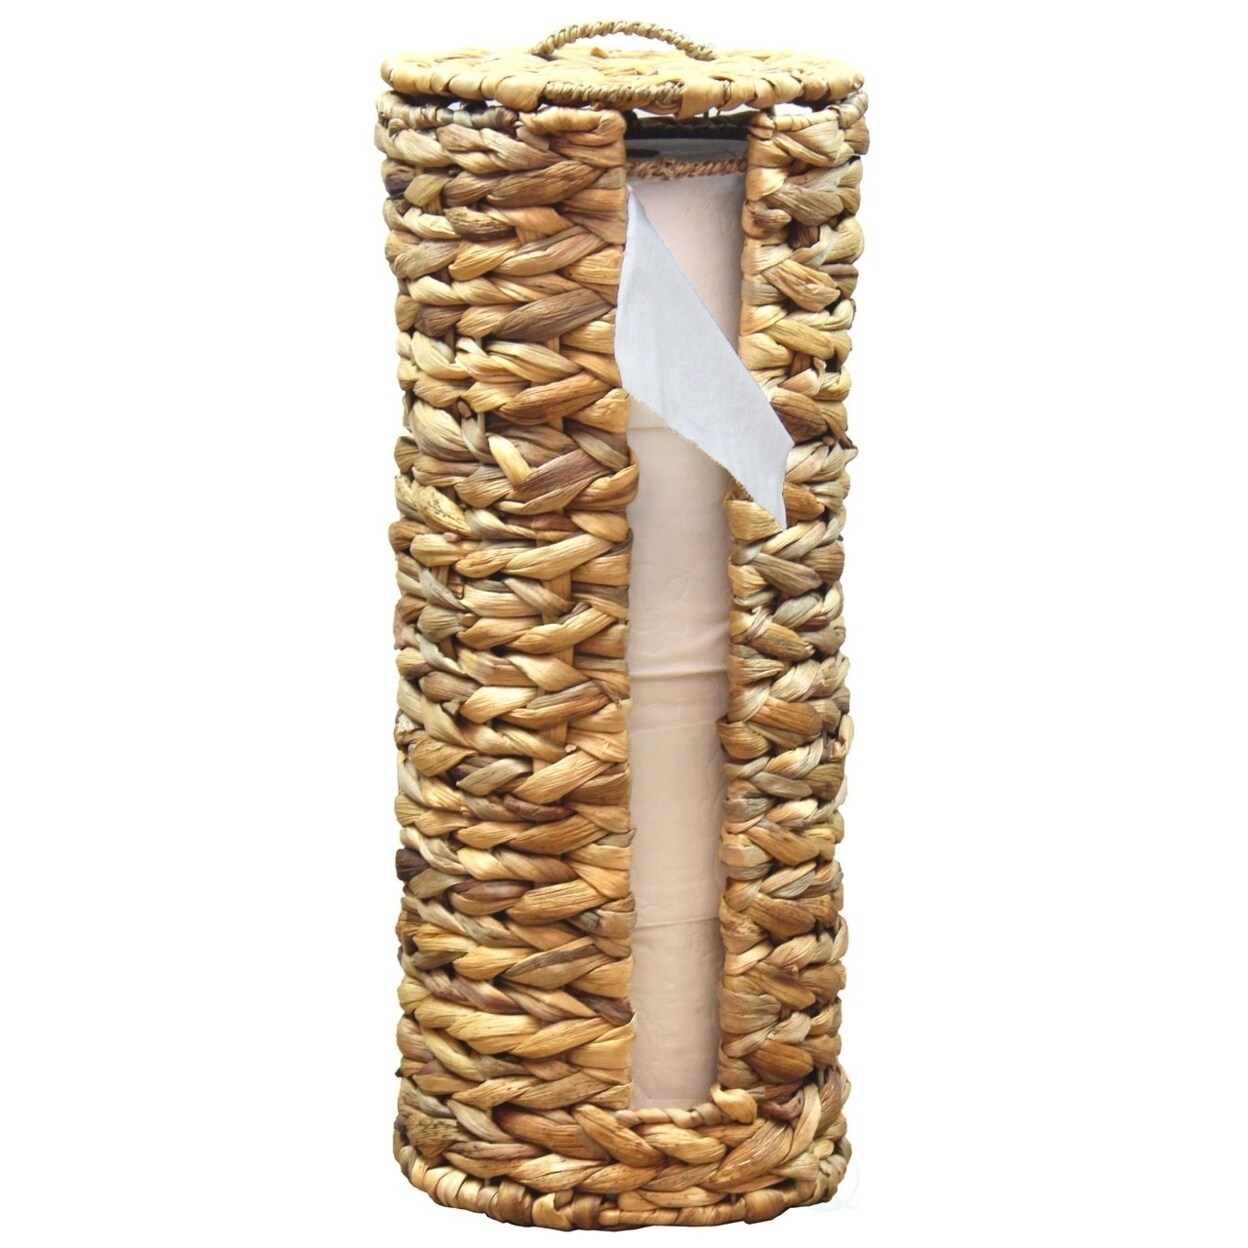 Wickerwise Wicker Water Hyacinth Tall Toilet Tissue Paper Holder for 4 wide rolls